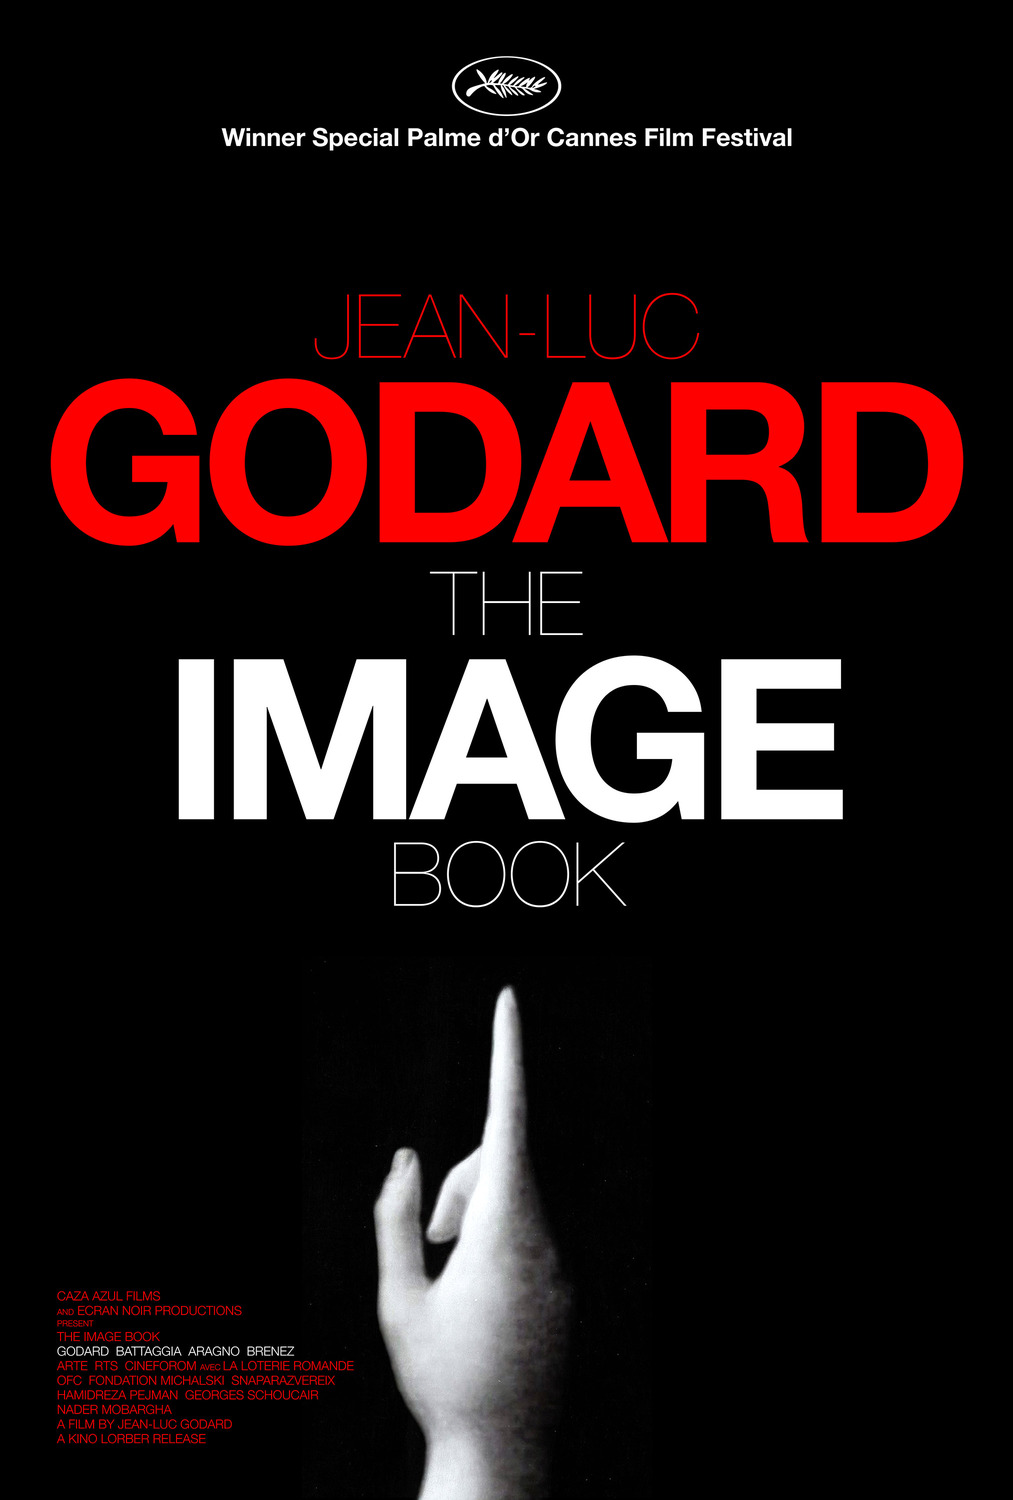 Extra Large Movie Poster Image for Le livre d'image 